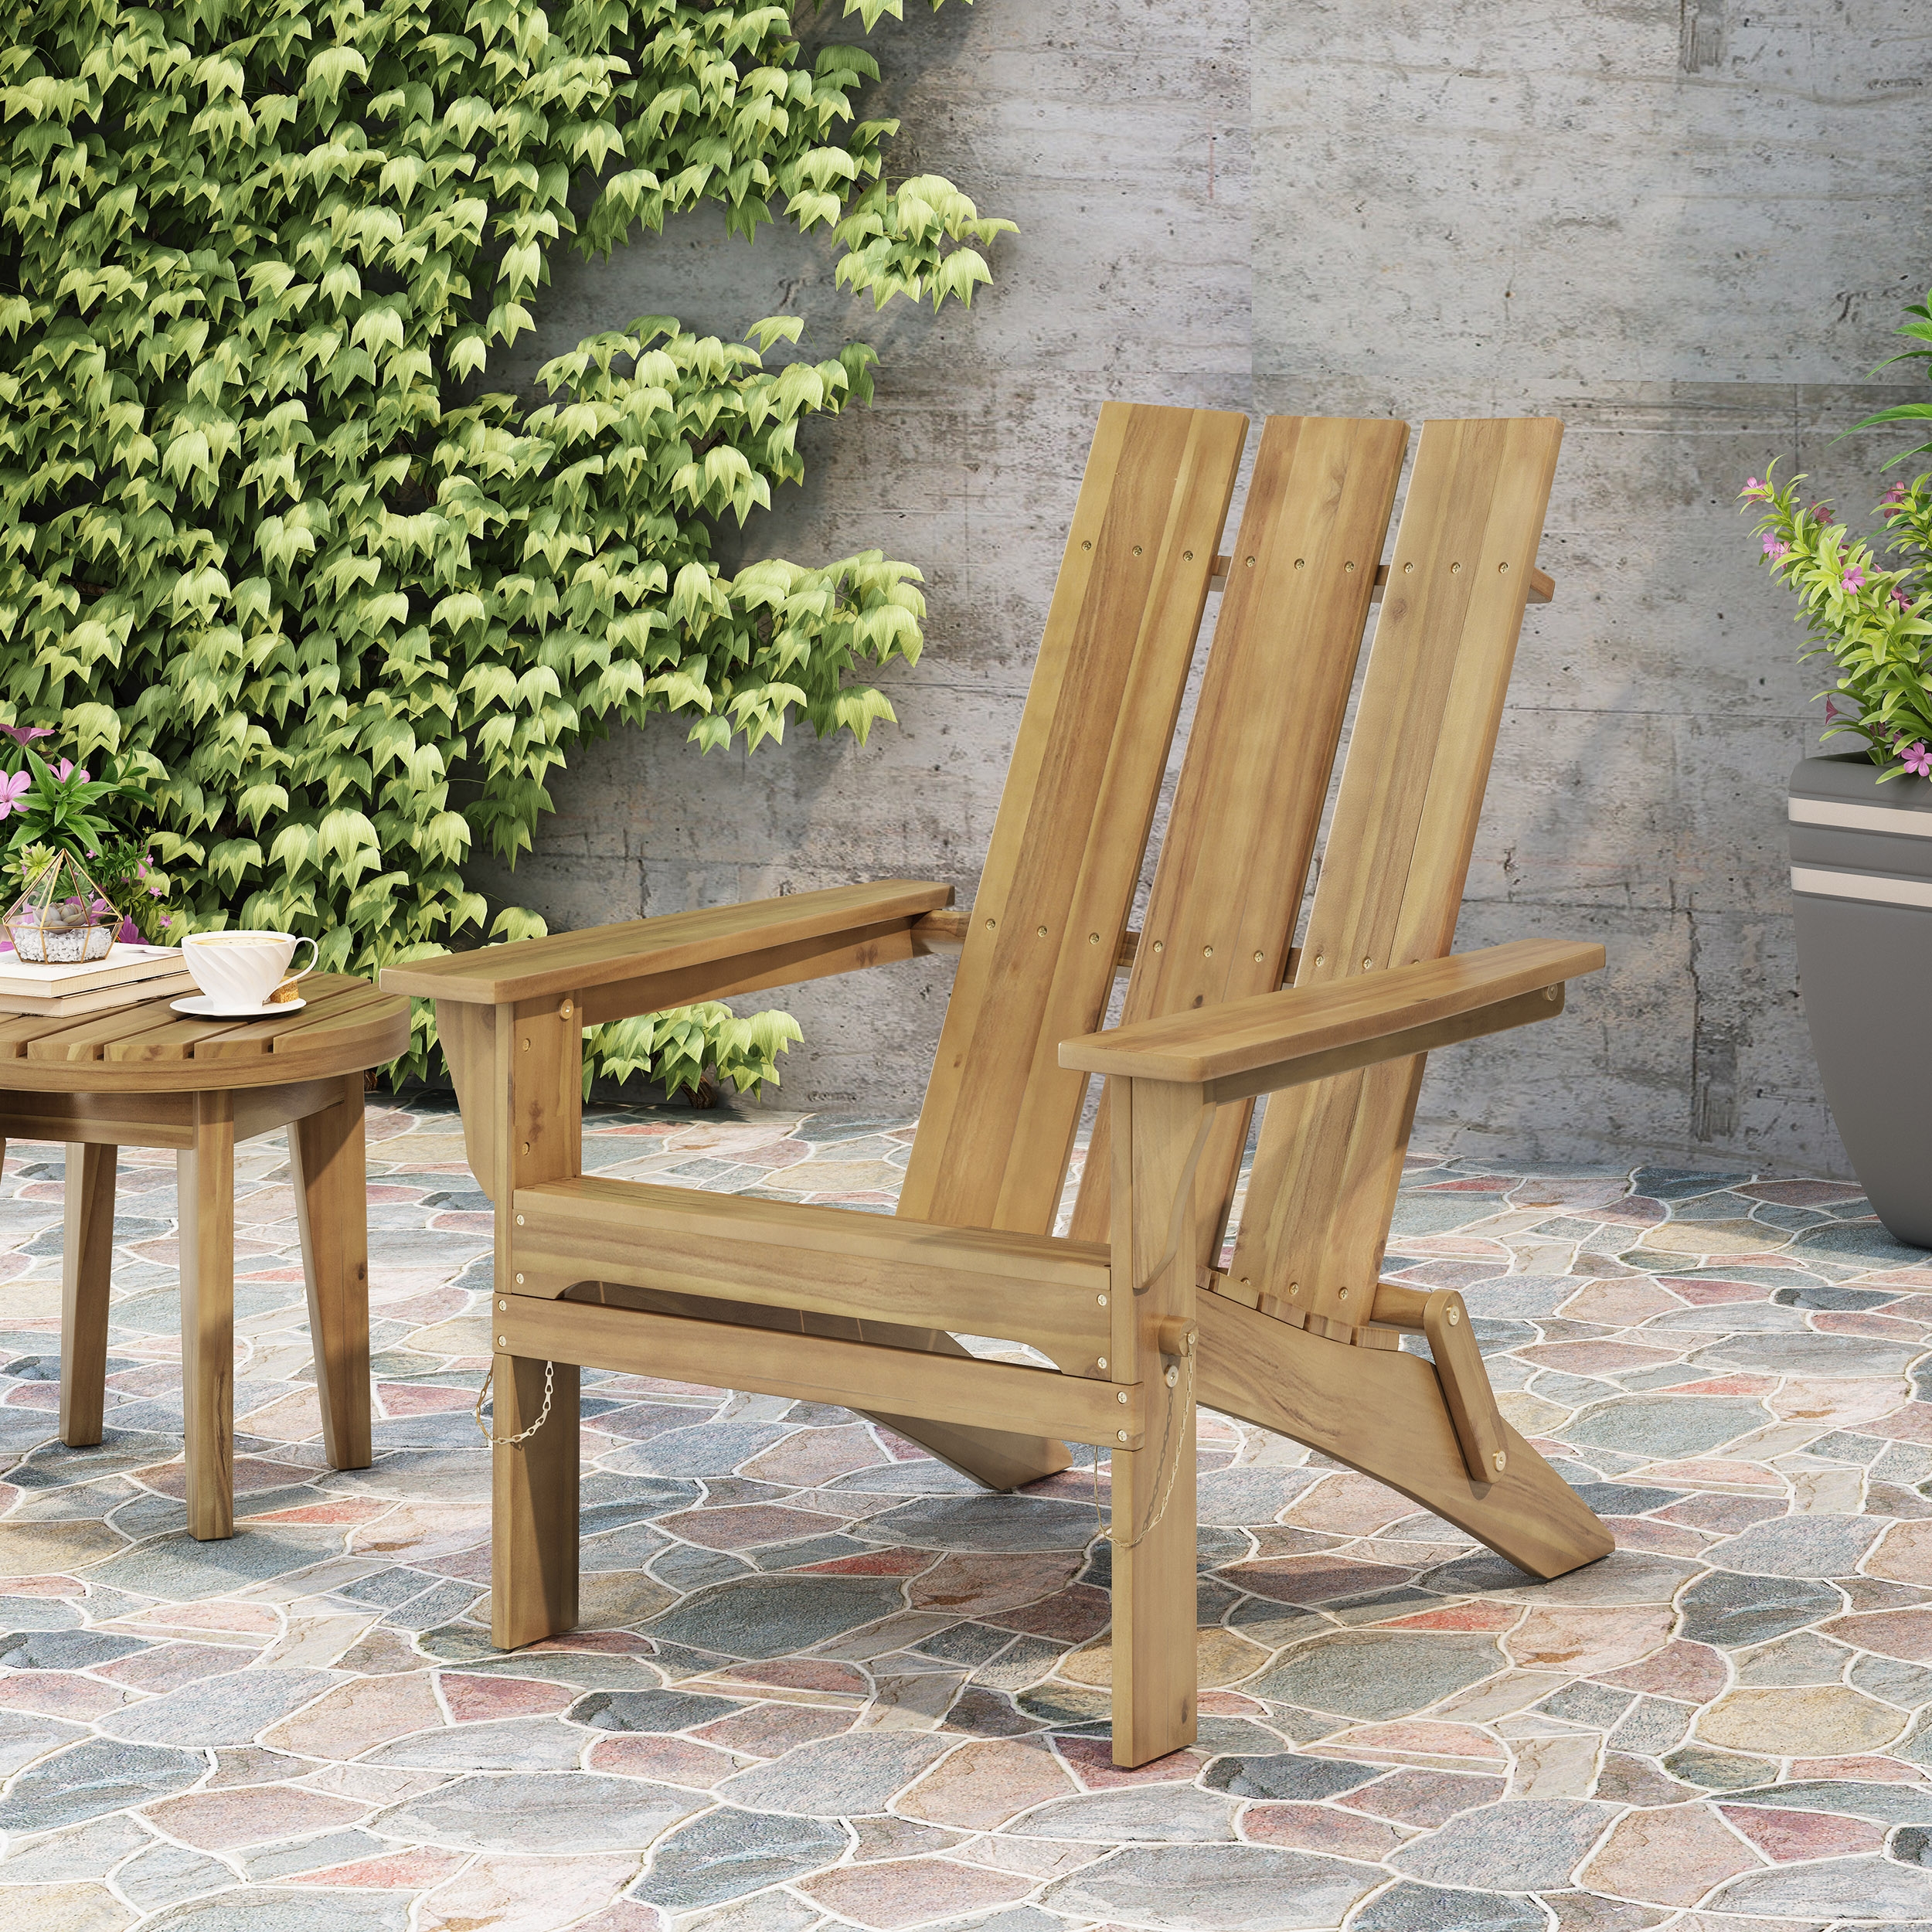 KUIKUI Outdoor Classic Natural Color Solid Wood Adirondack Chair Garden Lounge Chair - image 1 of 5